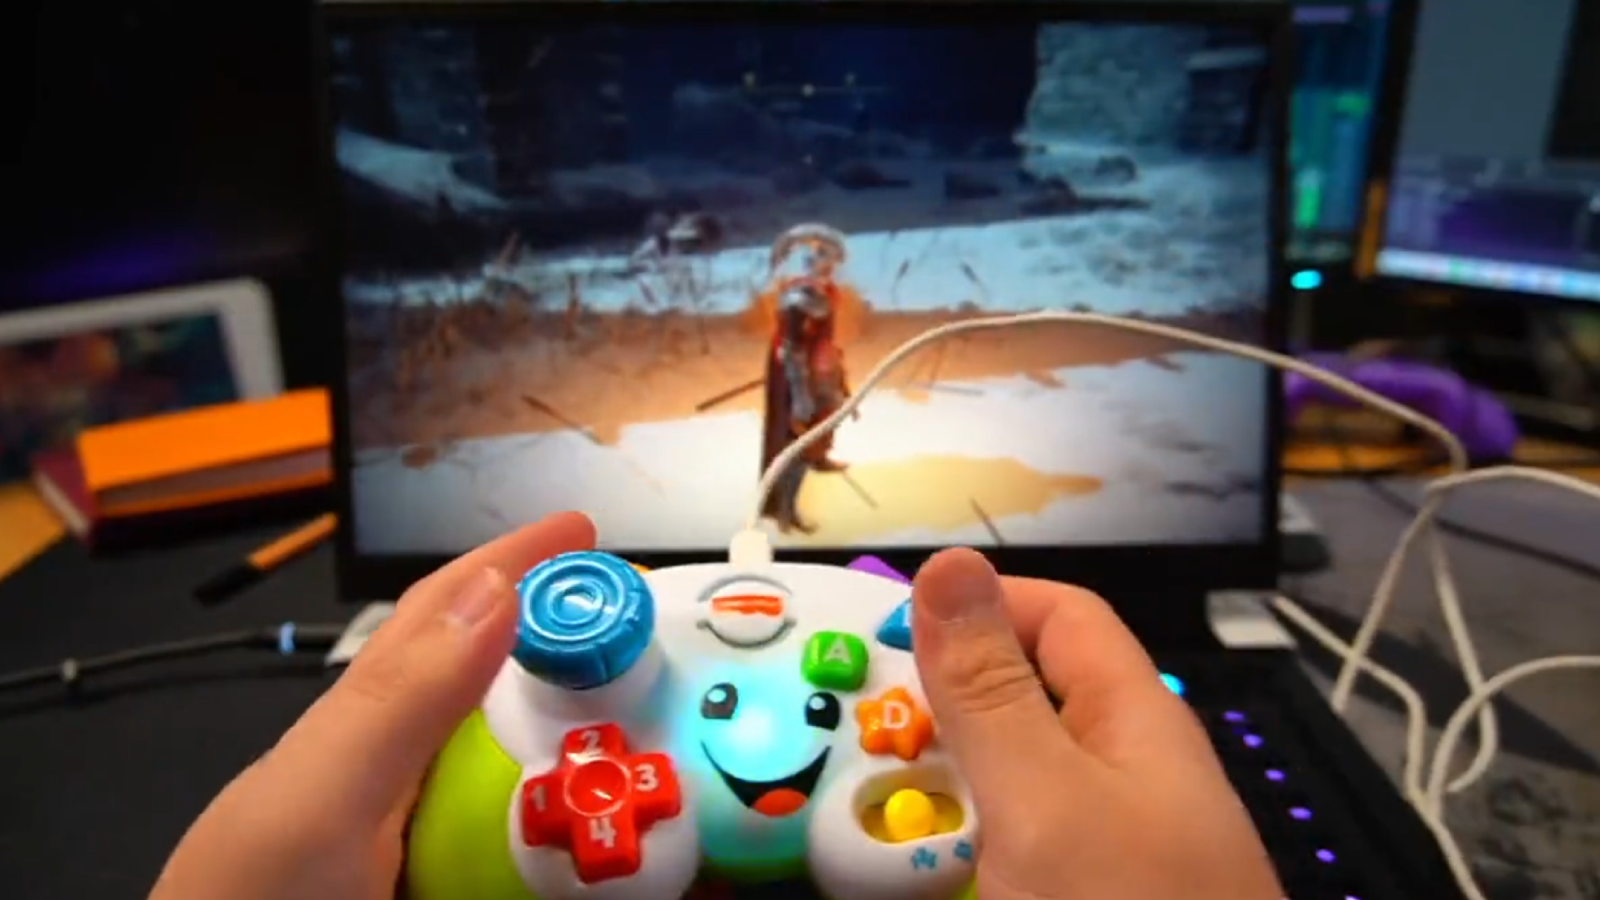 Image for Streamer mods Fisher Price controller to play Elden Ring